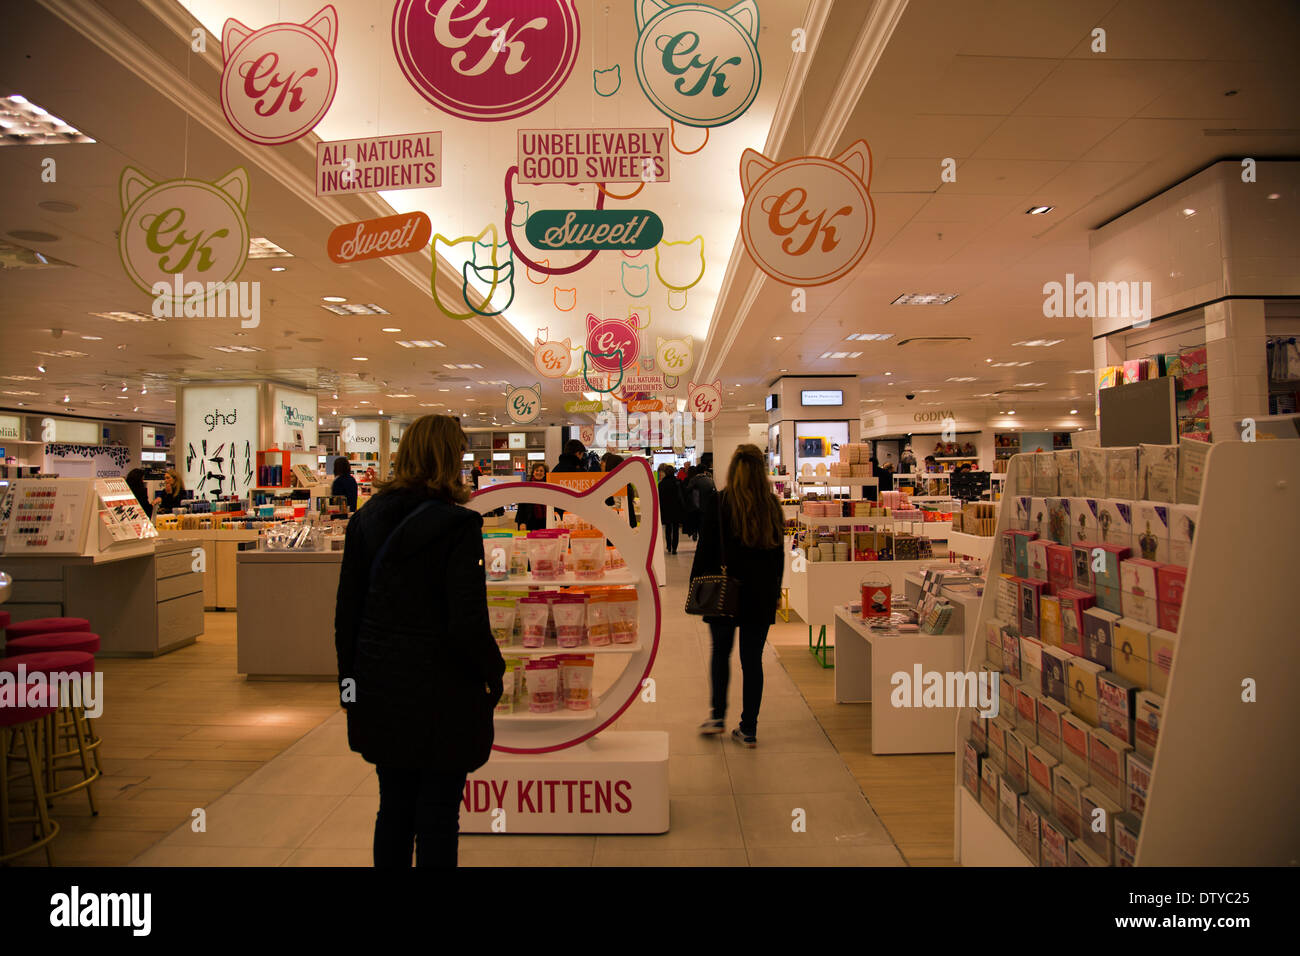 Candy Kittens Display on Ground Floor of Selfridges in Oxford Circus - London UK Stock Photo